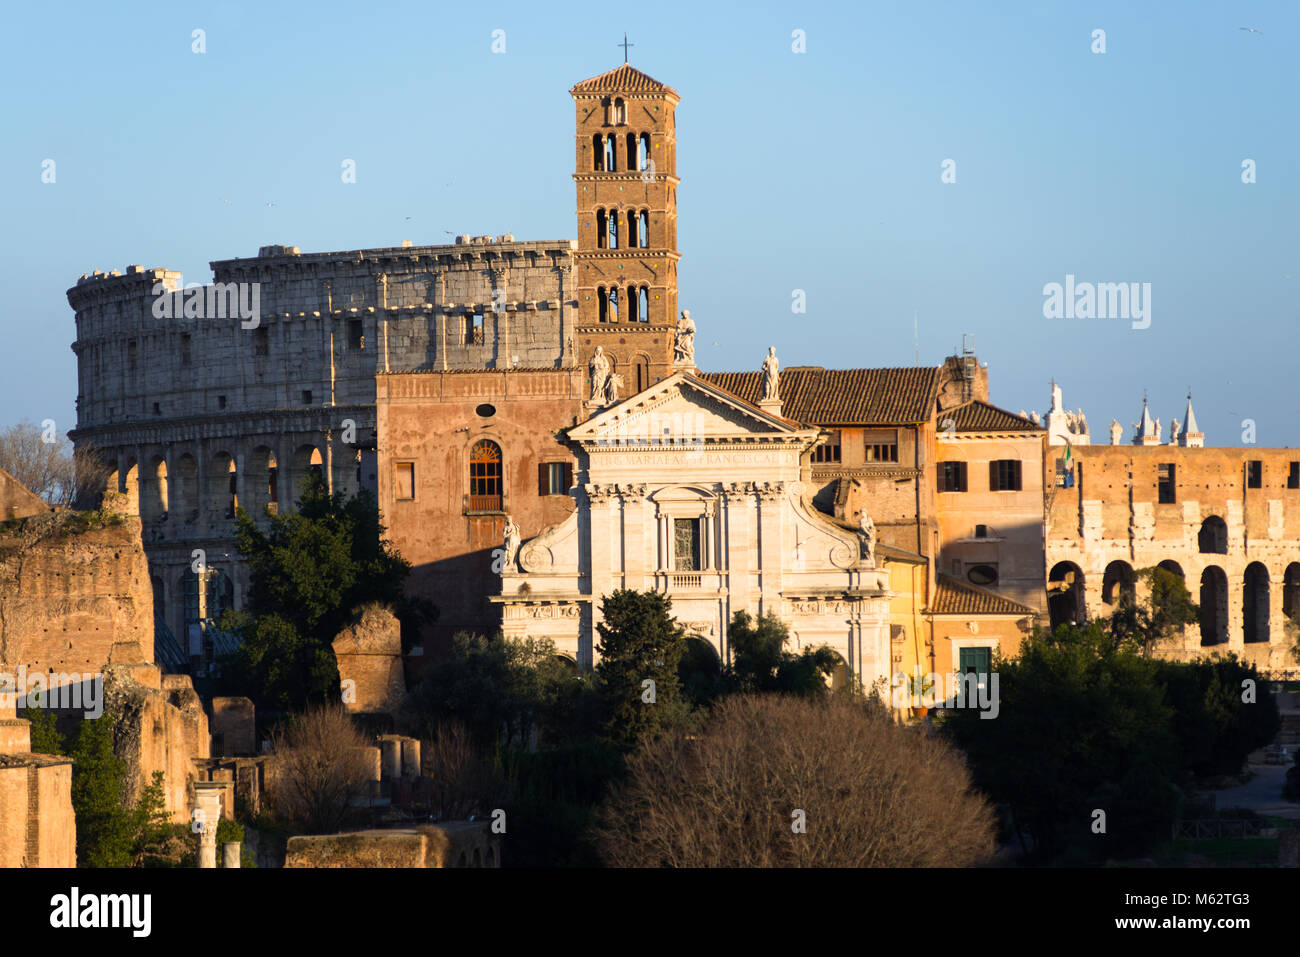 Ancient Rome city skyline with the Roman Forum and the Colosseum. Rome. Lazio. Italy. Stock Photo